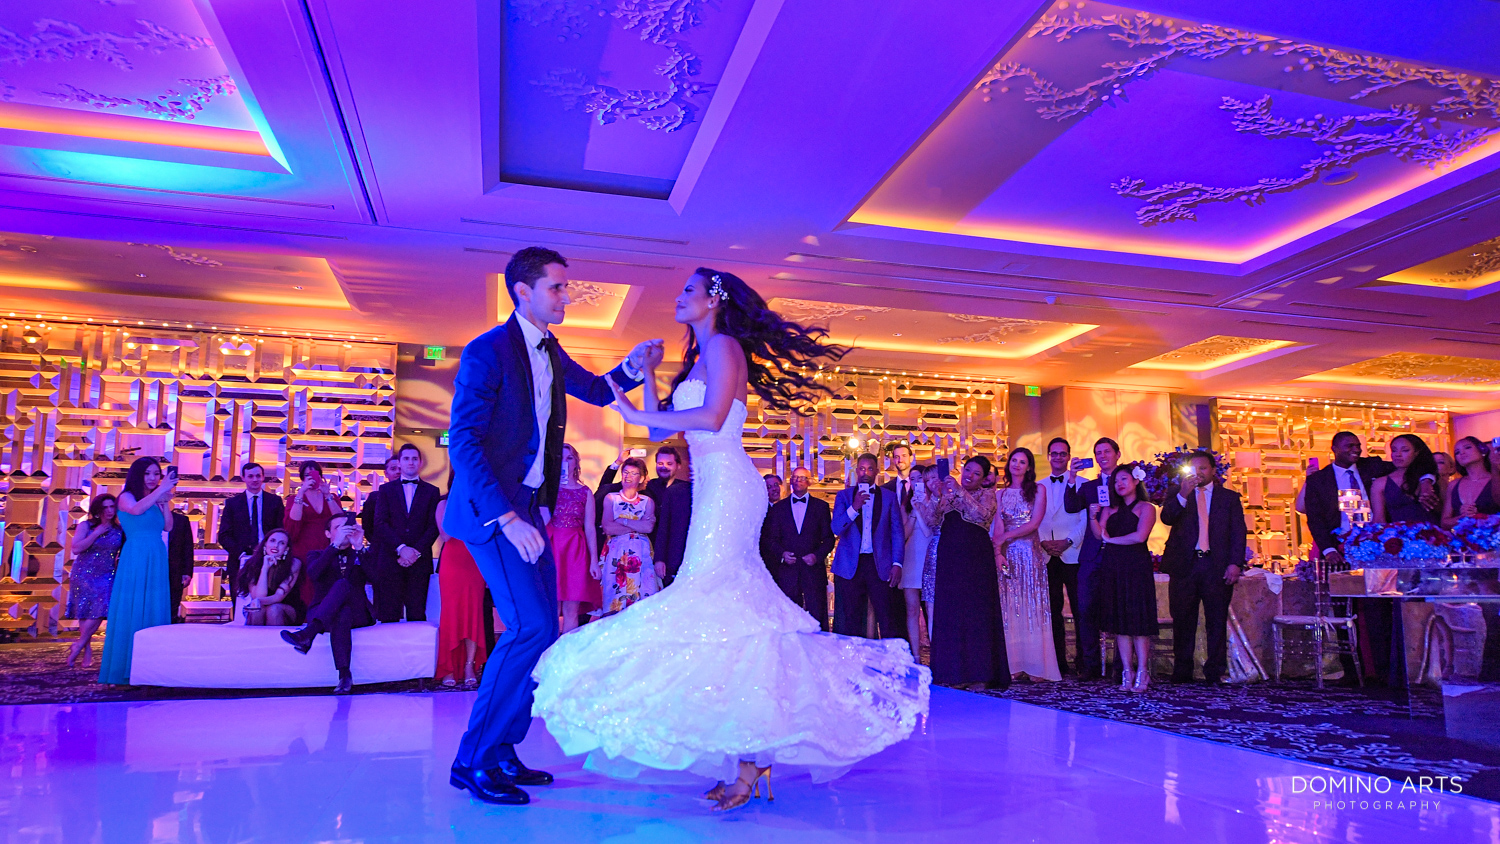 Best wedding picture of bride and groom first dance at The St. Regis Bal Harbour